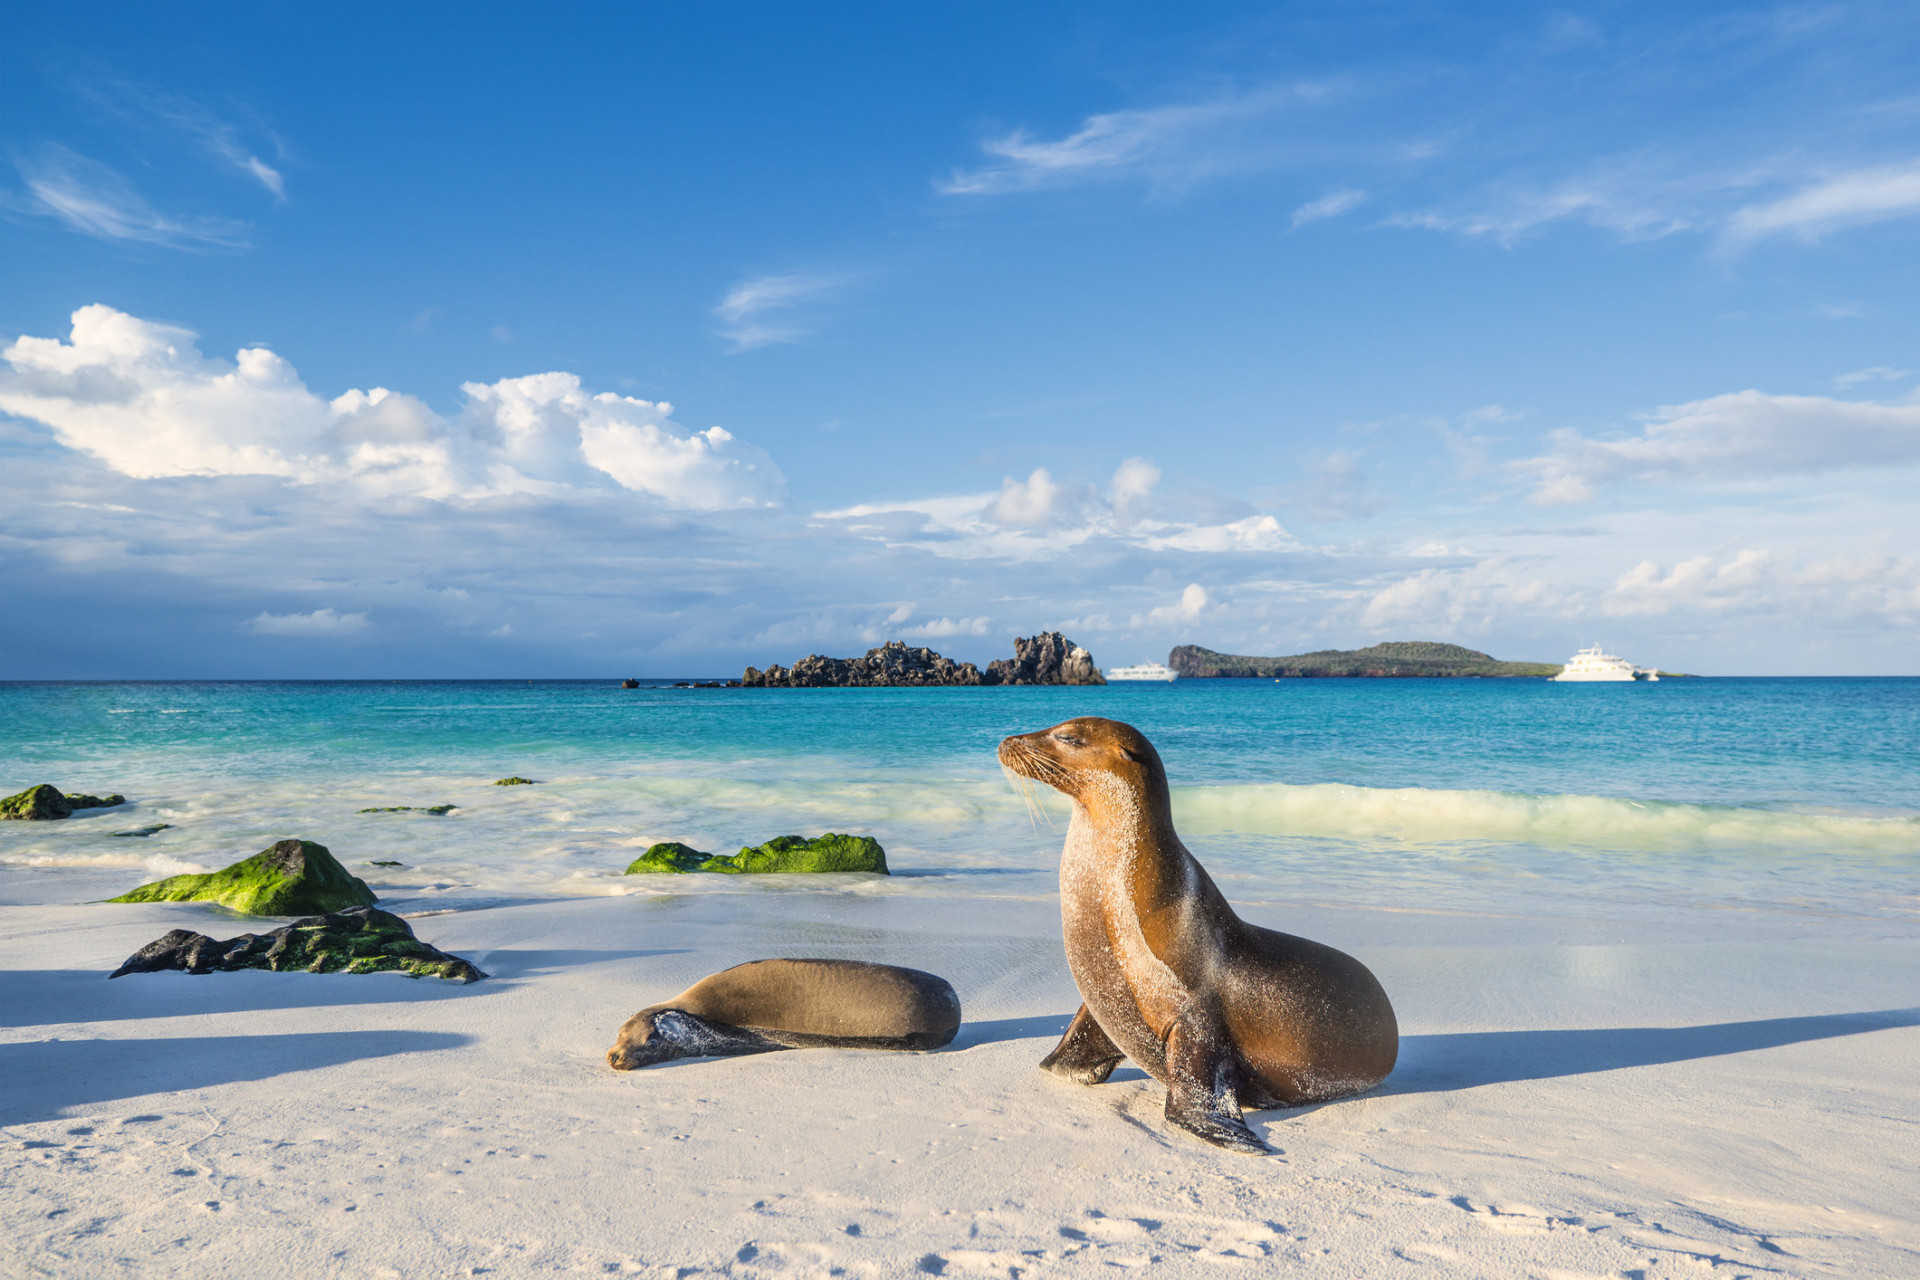 One of the most diverse destinations in terms of wildlife, the Galapagos are a paradise filled with incredible species, such as sea lions, coastal birds, and marine iguanas.<p><a href="https://www.msn.com/en-us/community/channel/vid-7xx8mnucu55yw63we9va2gwr7uihbxwc68fxqp25x6tg4ftibpra?cvid=94631541bc0f4f89bfd59158d696ad7e">Follow us and access great exclusive content every day</a></p>